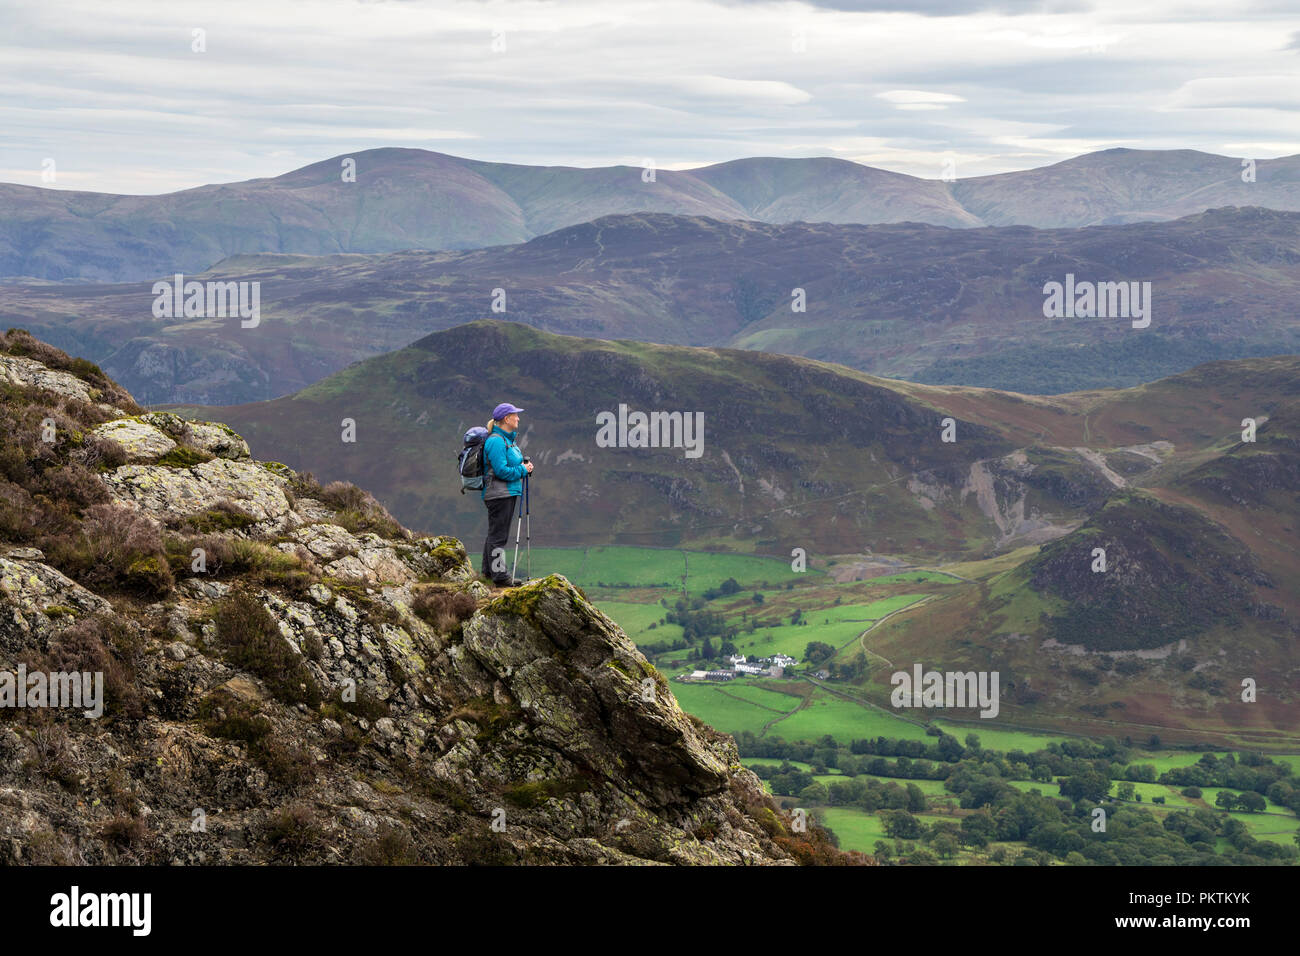 Lake District, Cumbria, Saturday 15th September 2018. UK Weather.  After a dull start to the day a walker enjoys a spectacular view over the Newlands Valley from the mountain of Ard Crags as the weather begins to clear in the Lake District. David Forster/Alamy Live News Stock Photo